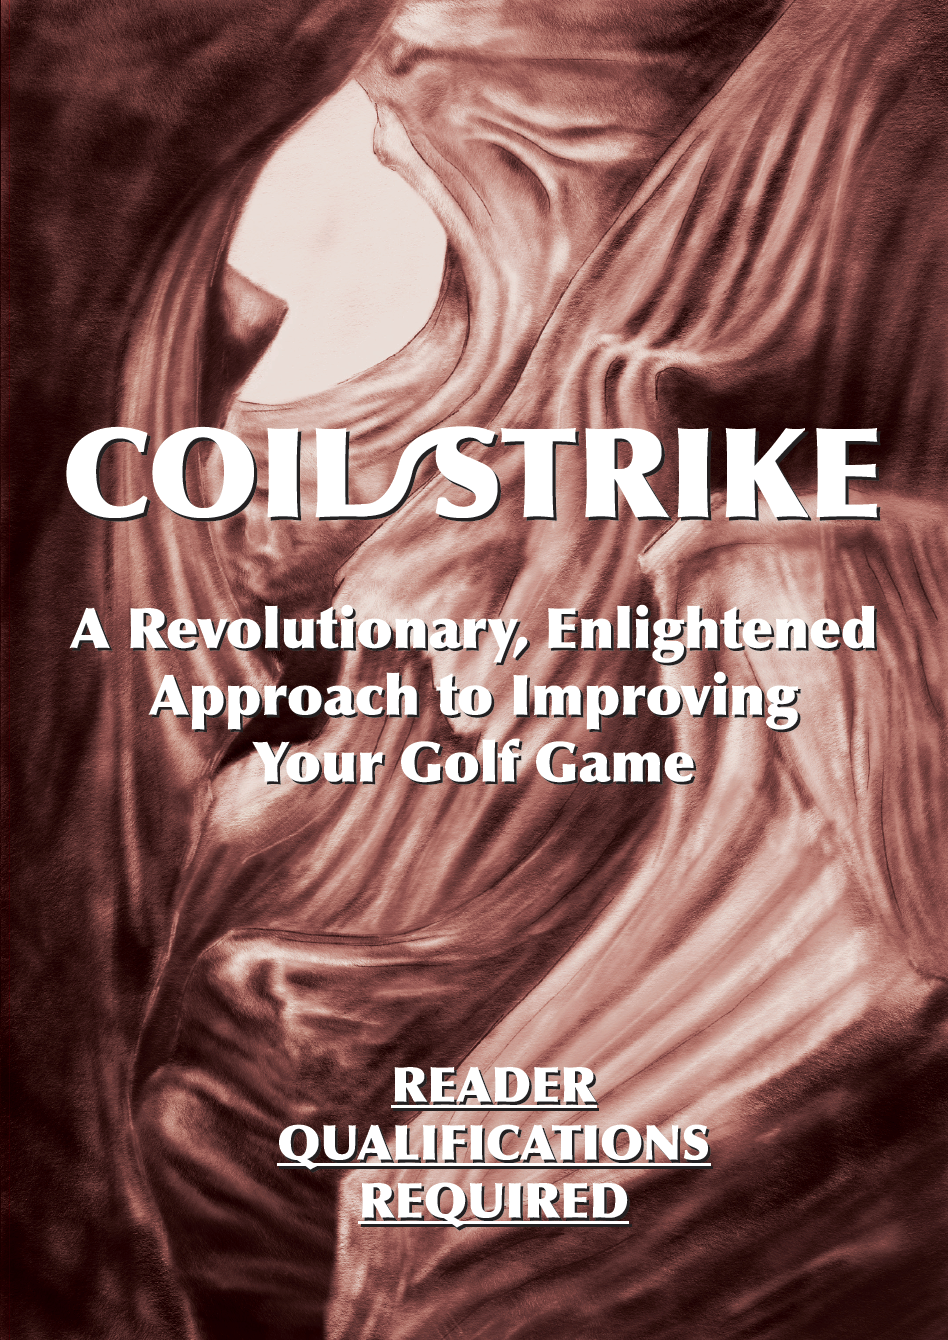 Coil/Strike: A Revolutionary, Enlightened Approach to Improving Your Golf Game--Reader Qualifications Required